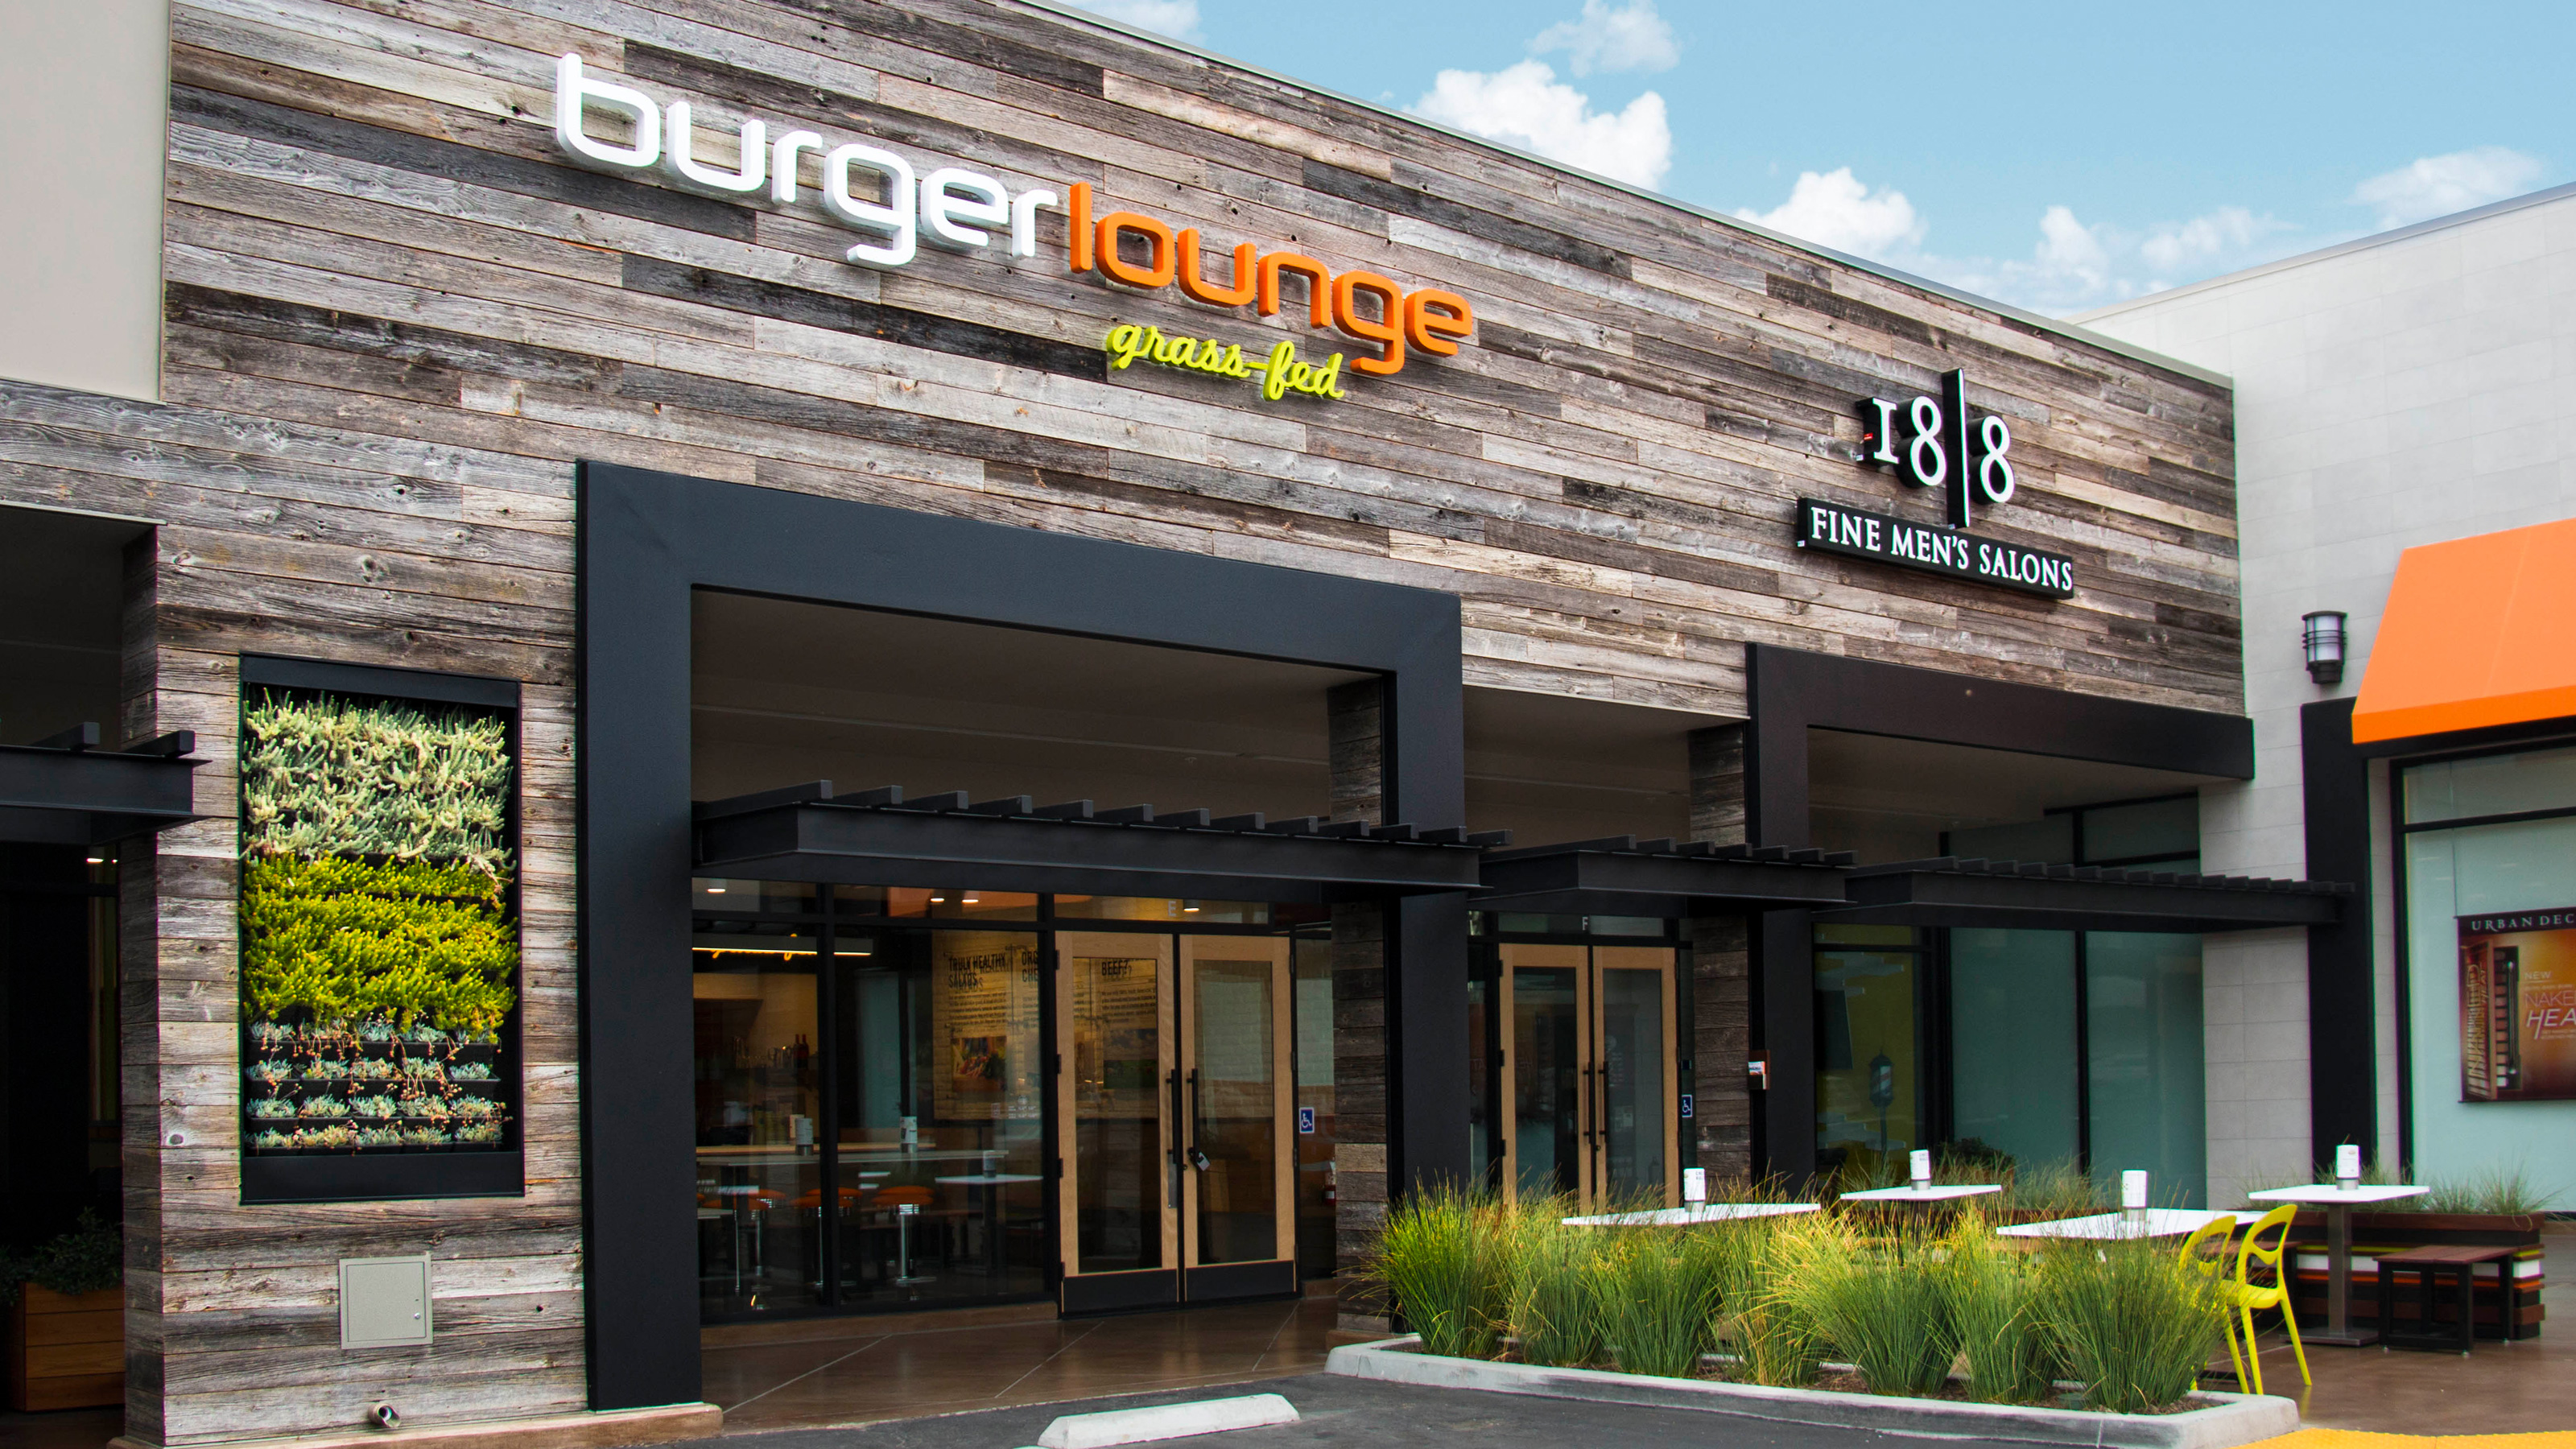 Home Page : Burger Lounge